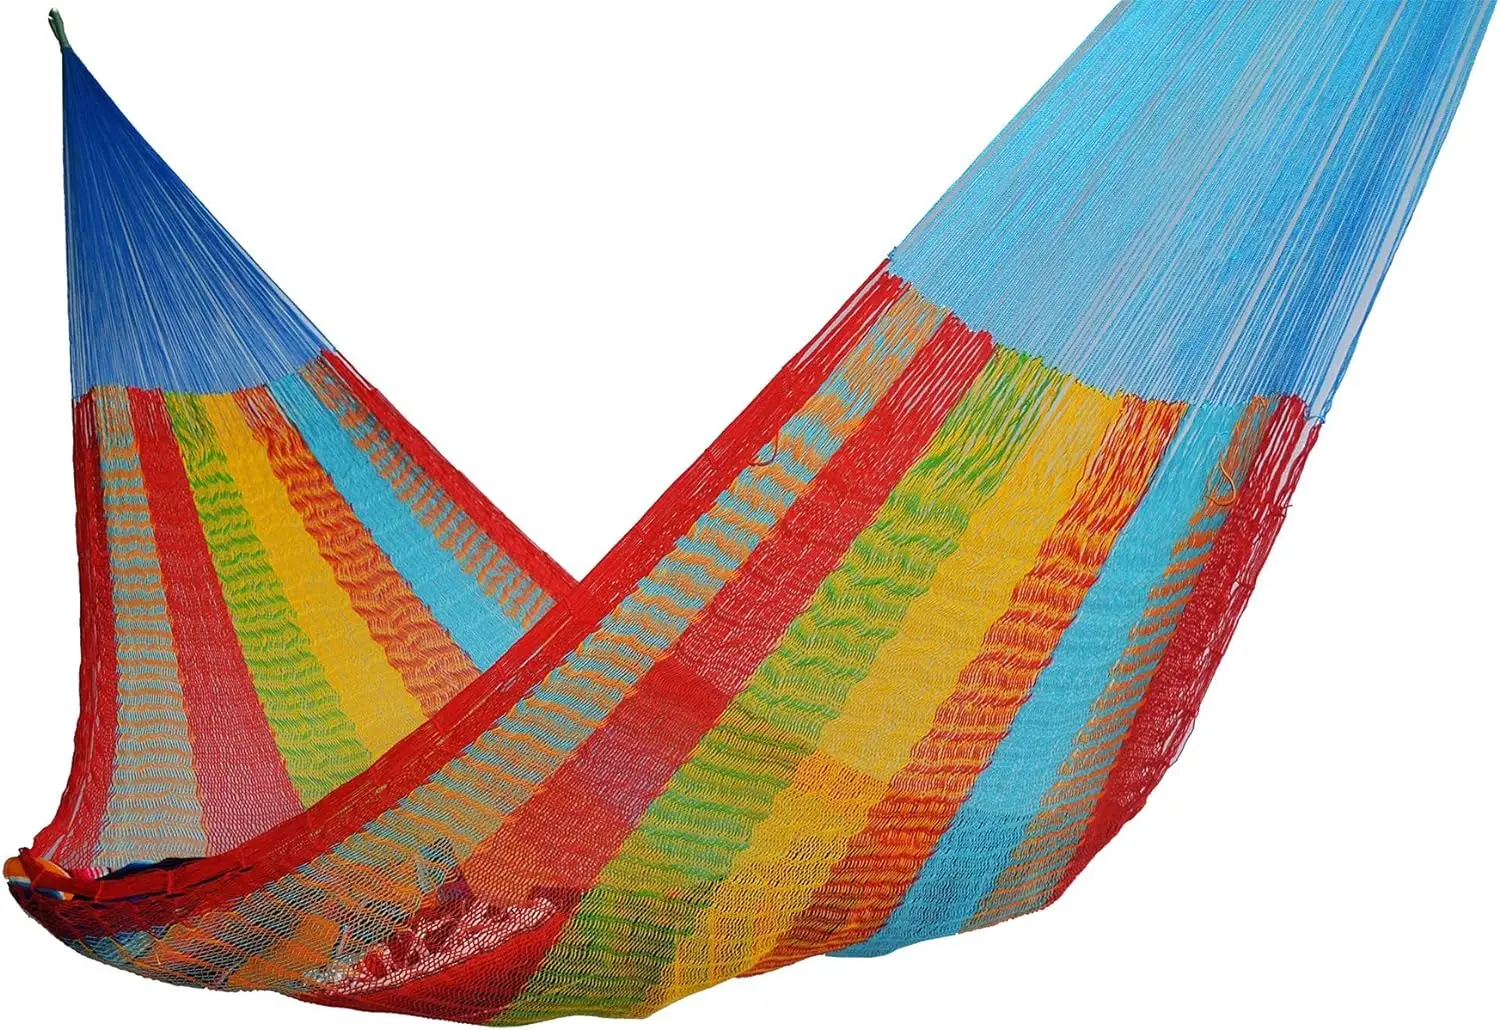 

Hammocks - Handmade Yucatan Hammock - Artisan Crafted in Central America - Fits Most 12 Ft. - 13 Ft. Stands - Carries Up to 330